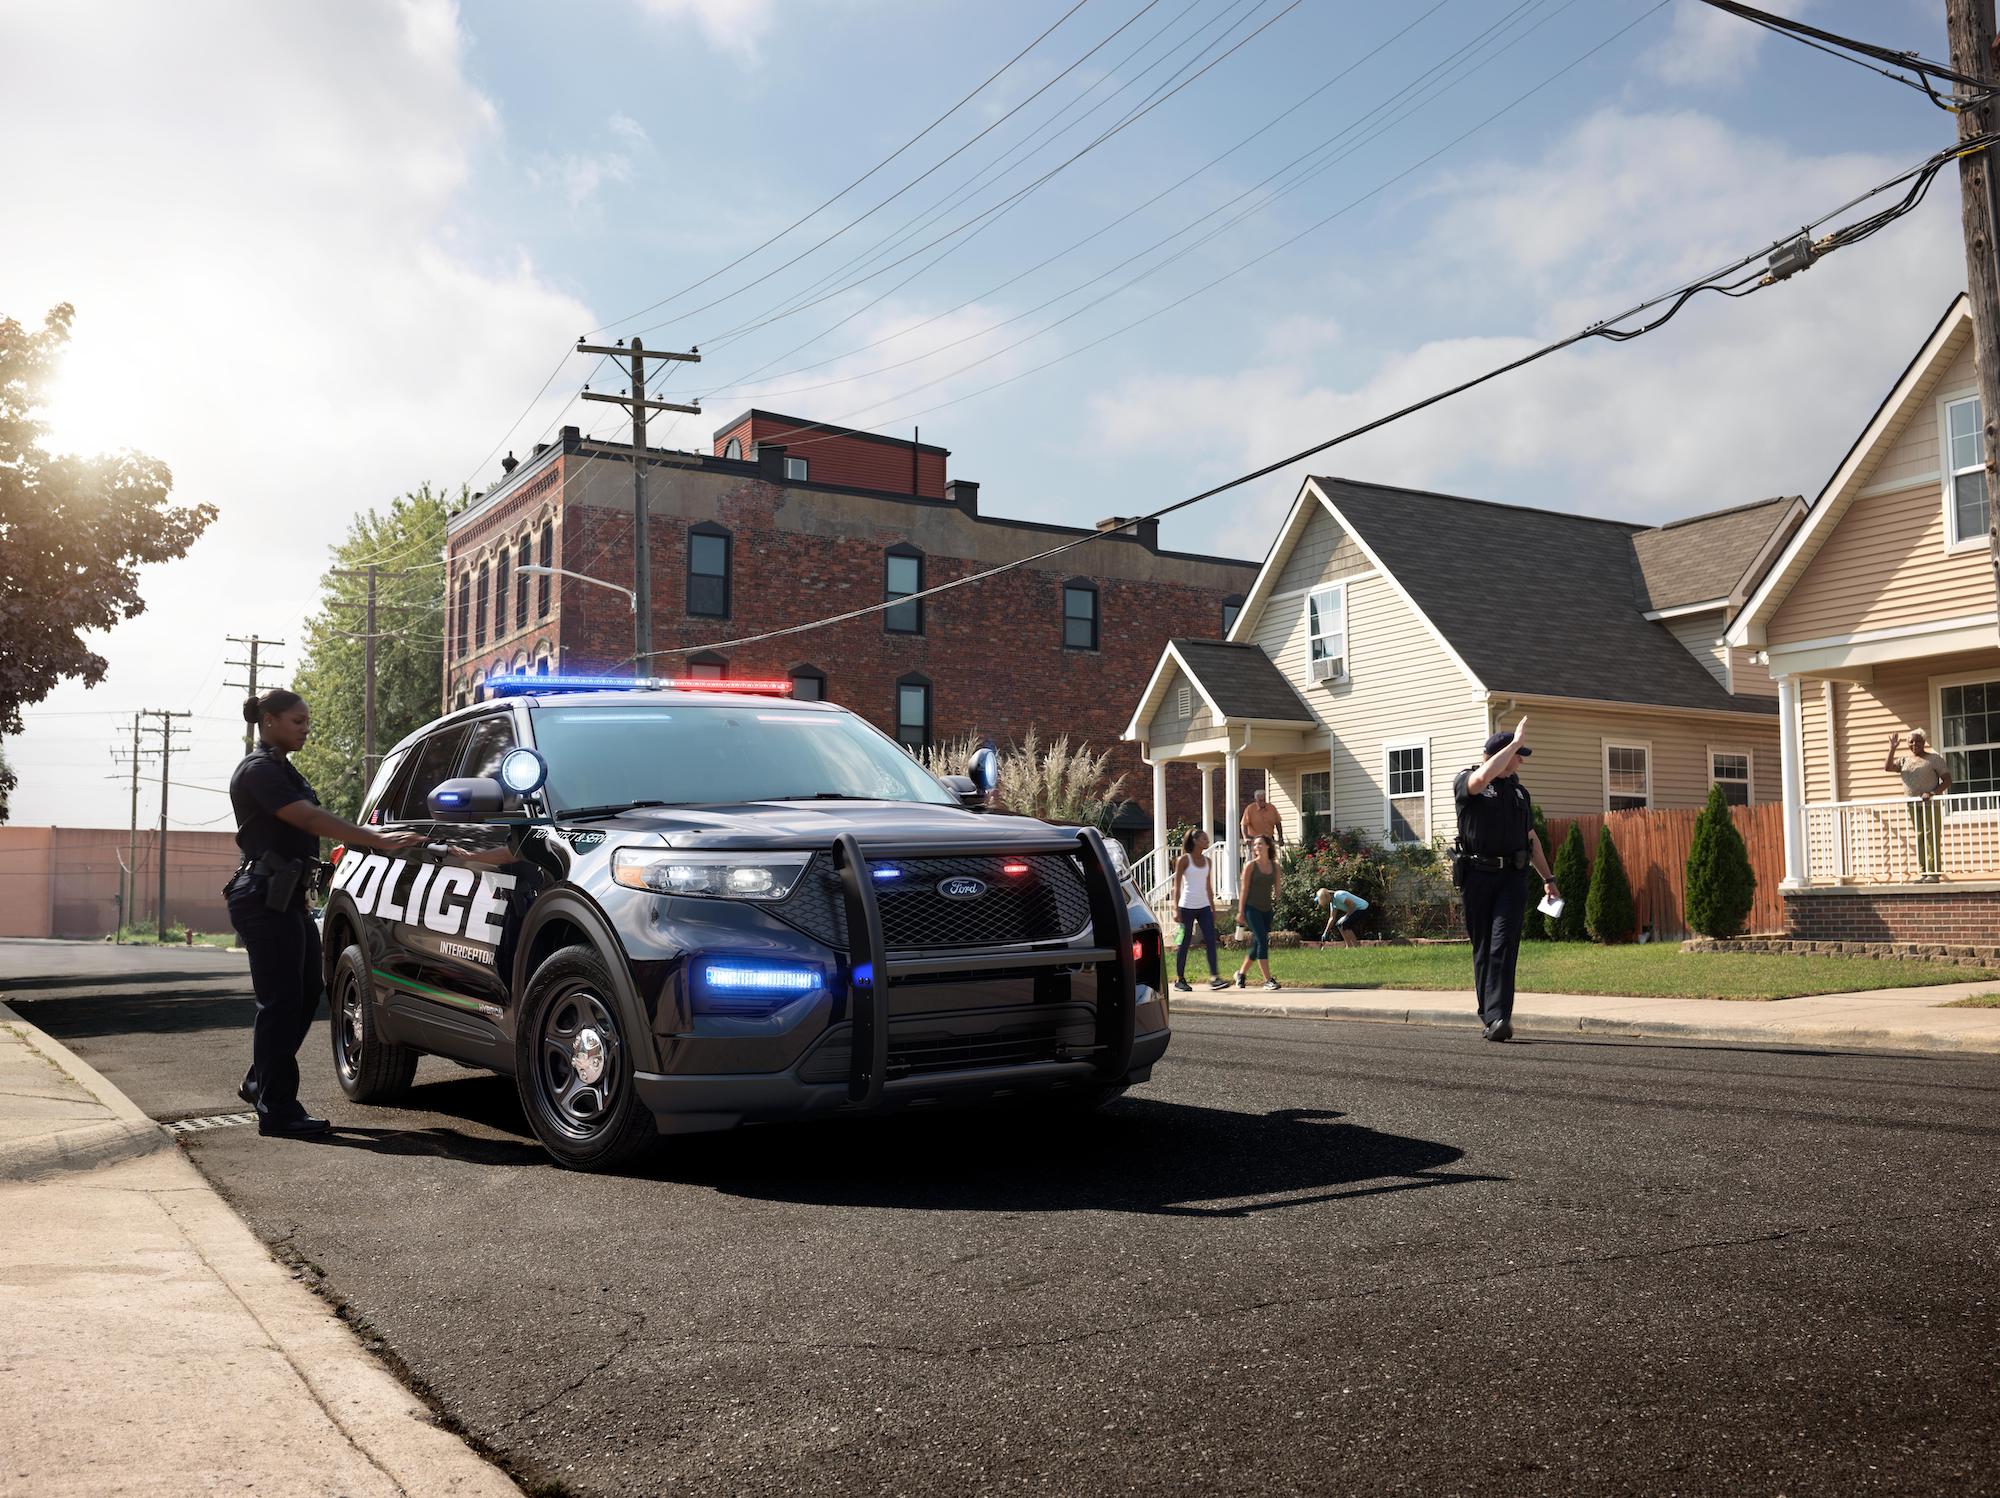 A 2020 Ford Police Interceptor Utility Hybrid SUV parked on a residential street with two police officers standing nearby